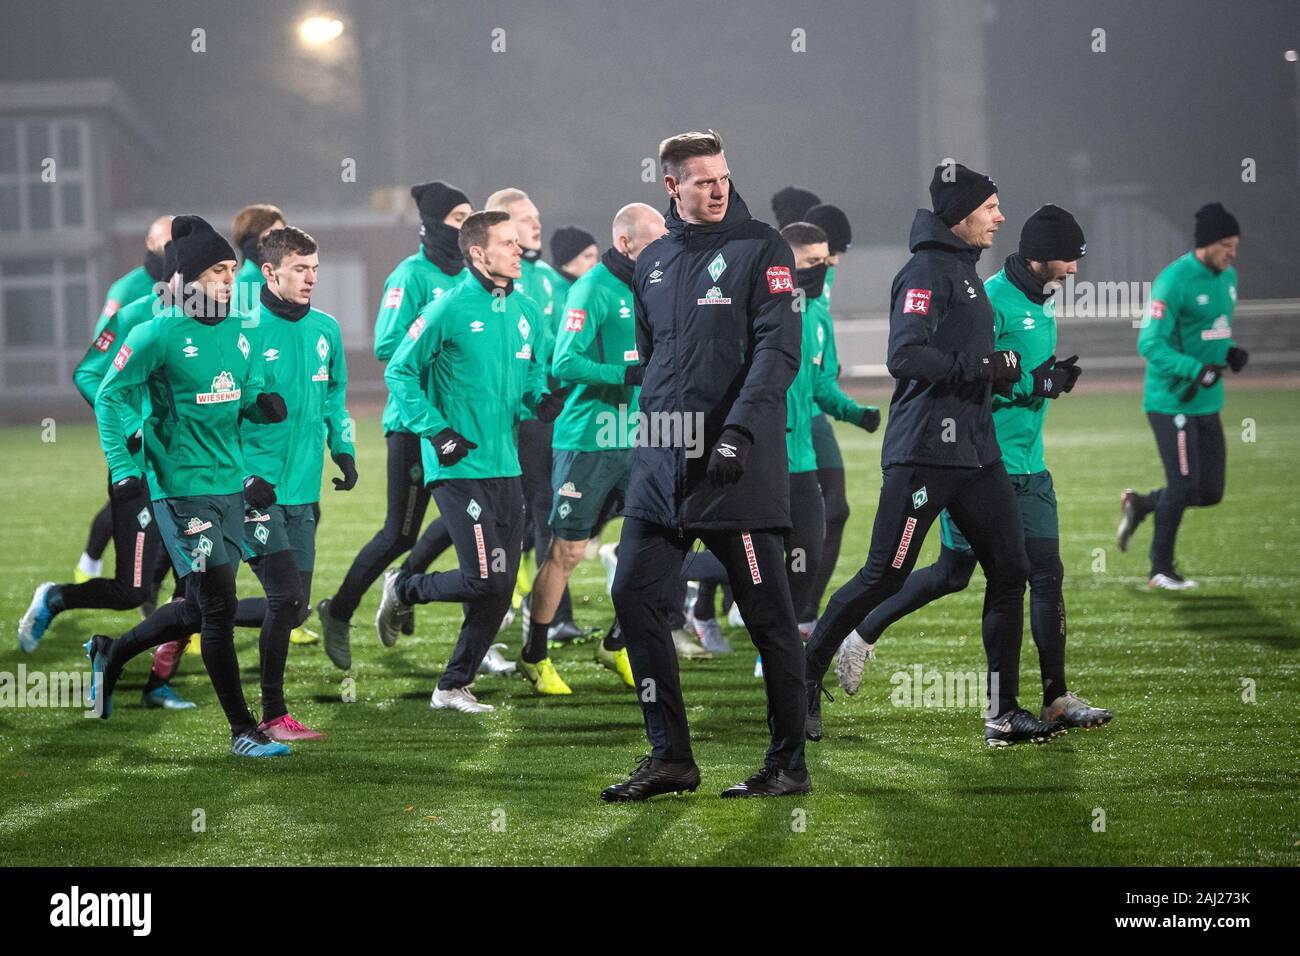 Bremen, Germany. 02nd Jan, 2020. Football: Bundesliga, training kick-off SV Werder Bremen. Tim Borowski (in front), assistant coach of Werder Bremen, passes the players running across the pitch. Credit: Sina Schuldt/dpa - IMPORTANT NOTE: In accordance with the regulations of the DFL Deutsche Fußball Liga and the DFB Deutscher Fußball-Bund, it is prohibited to exploit or have exploited in the stadium and/or from the game taken photographs in the form of sequence images and/or video-like photo series./dpa/Alamy Live News Stock Photo